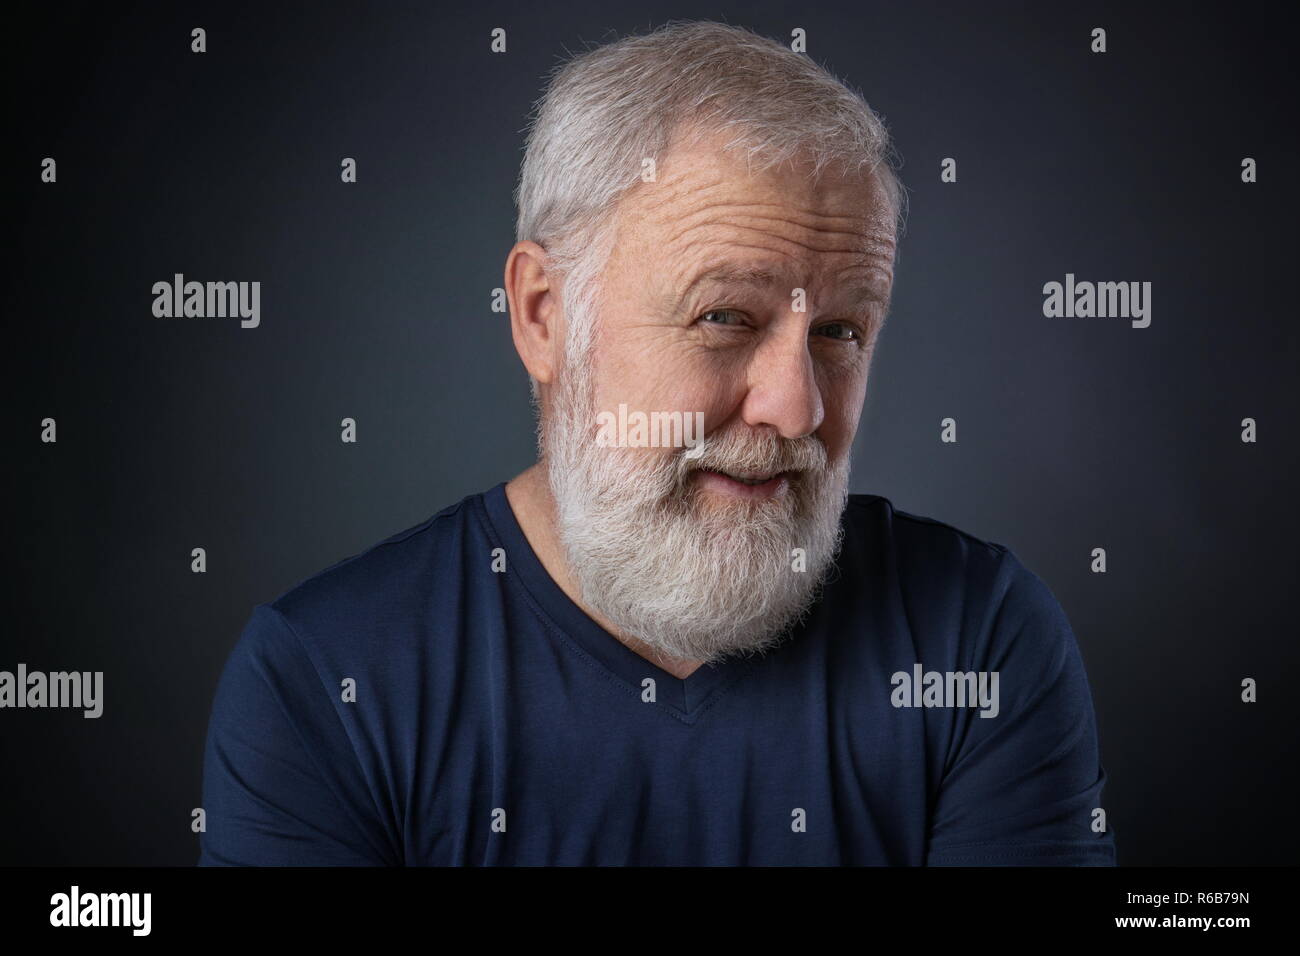 Portrait of senior with gray beard and a suspicious look Stock Photo